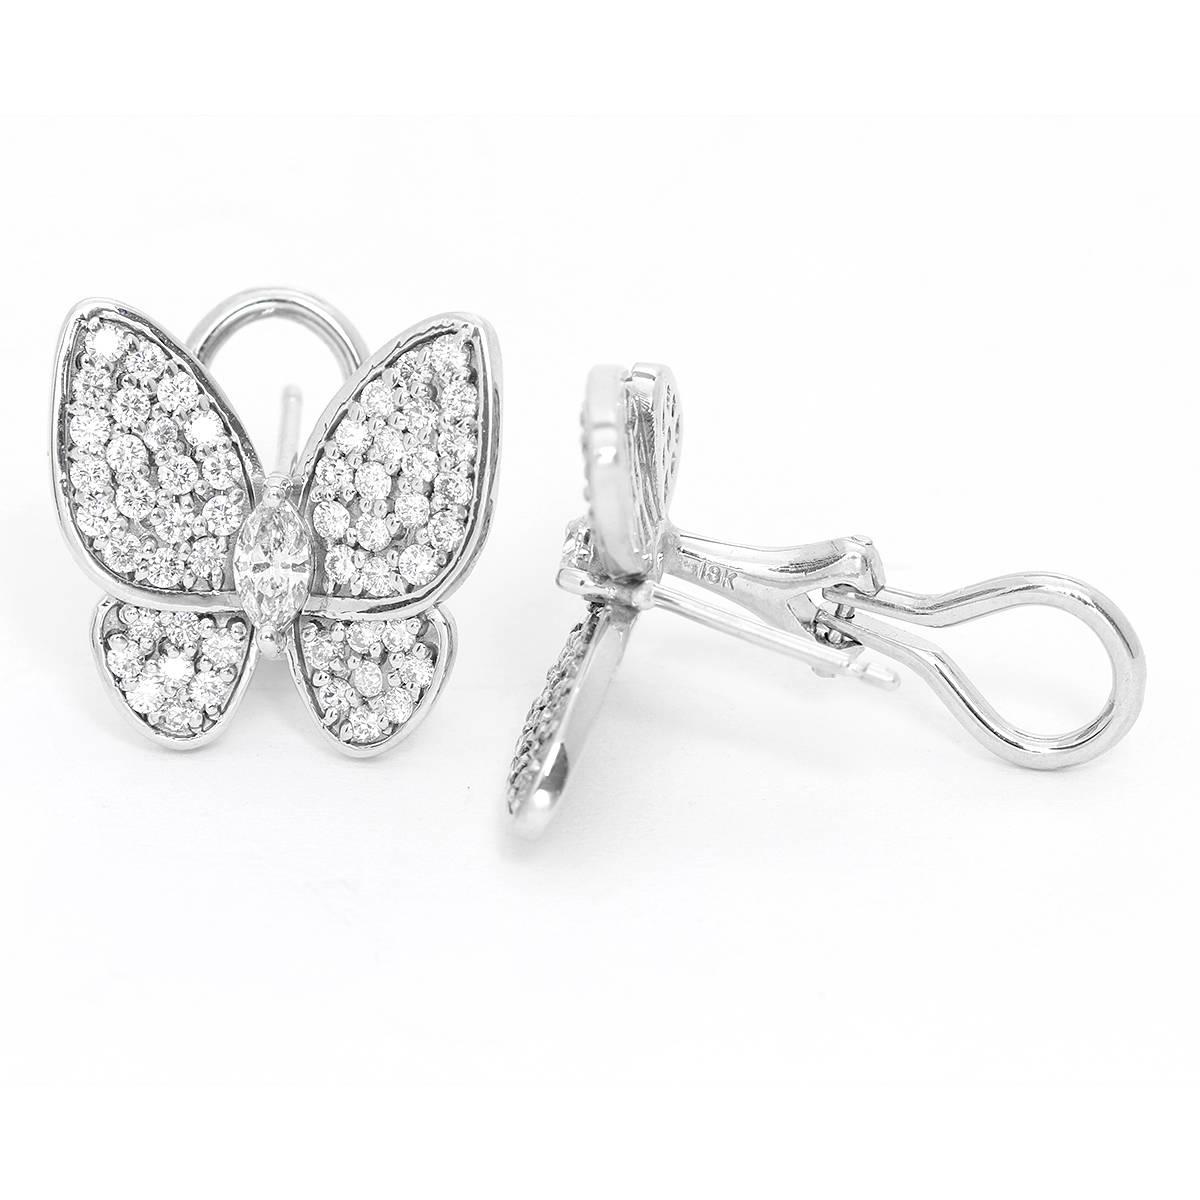 18K White Gold Diamond Butterfly Earrings - . Two Butterfly earrings,. 2 White gold earrings weighing .1.42cts diamonds. Omega backs. Total weight 7.5 grams. These dazzling pieces combine color and symmetry. Perfect to dress up or down.
Retail: